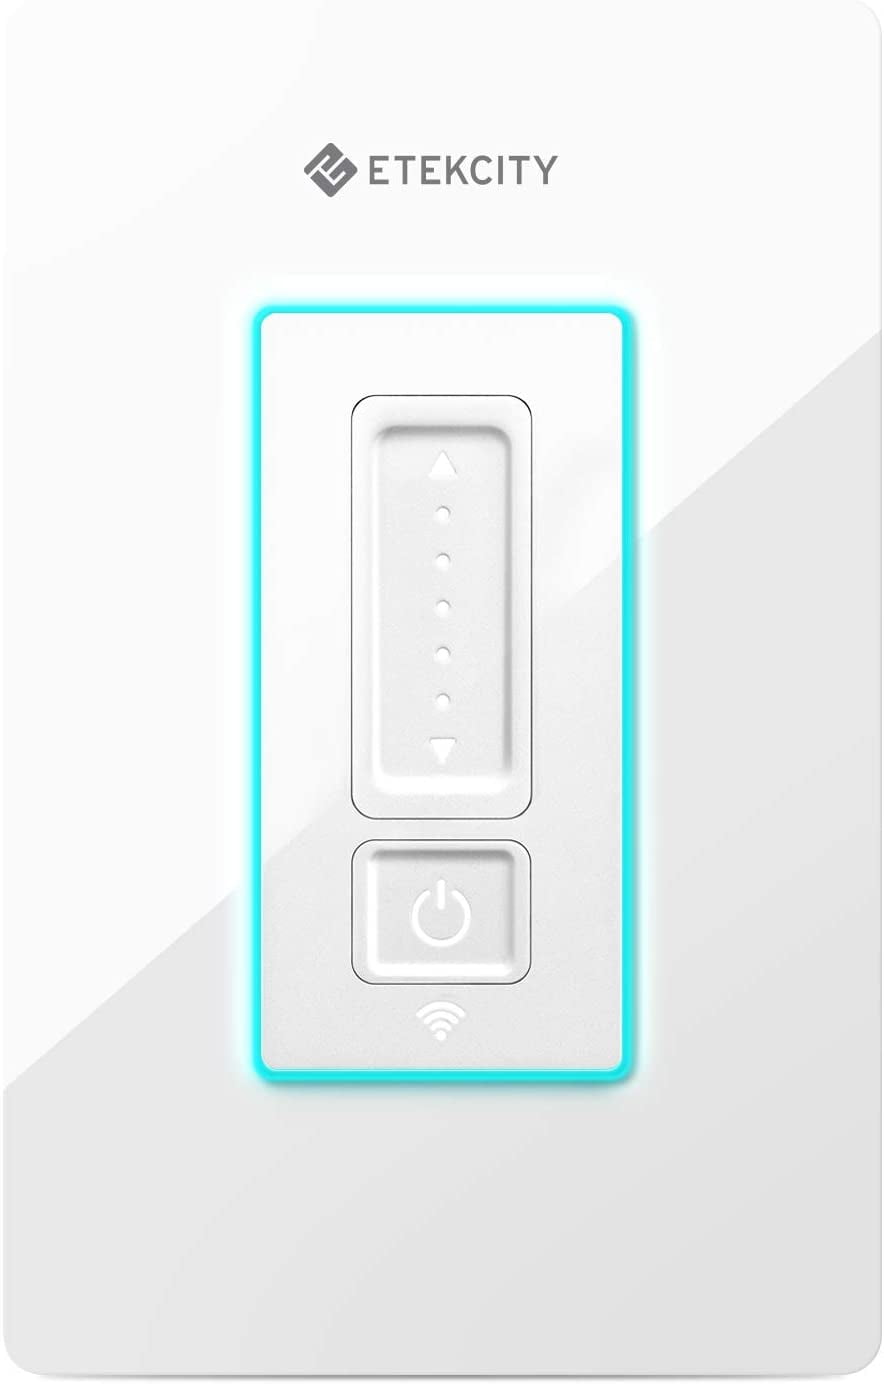 Manage Distraction theater Etekcity Smart WiFi Dimmer Switch - Walmart.com